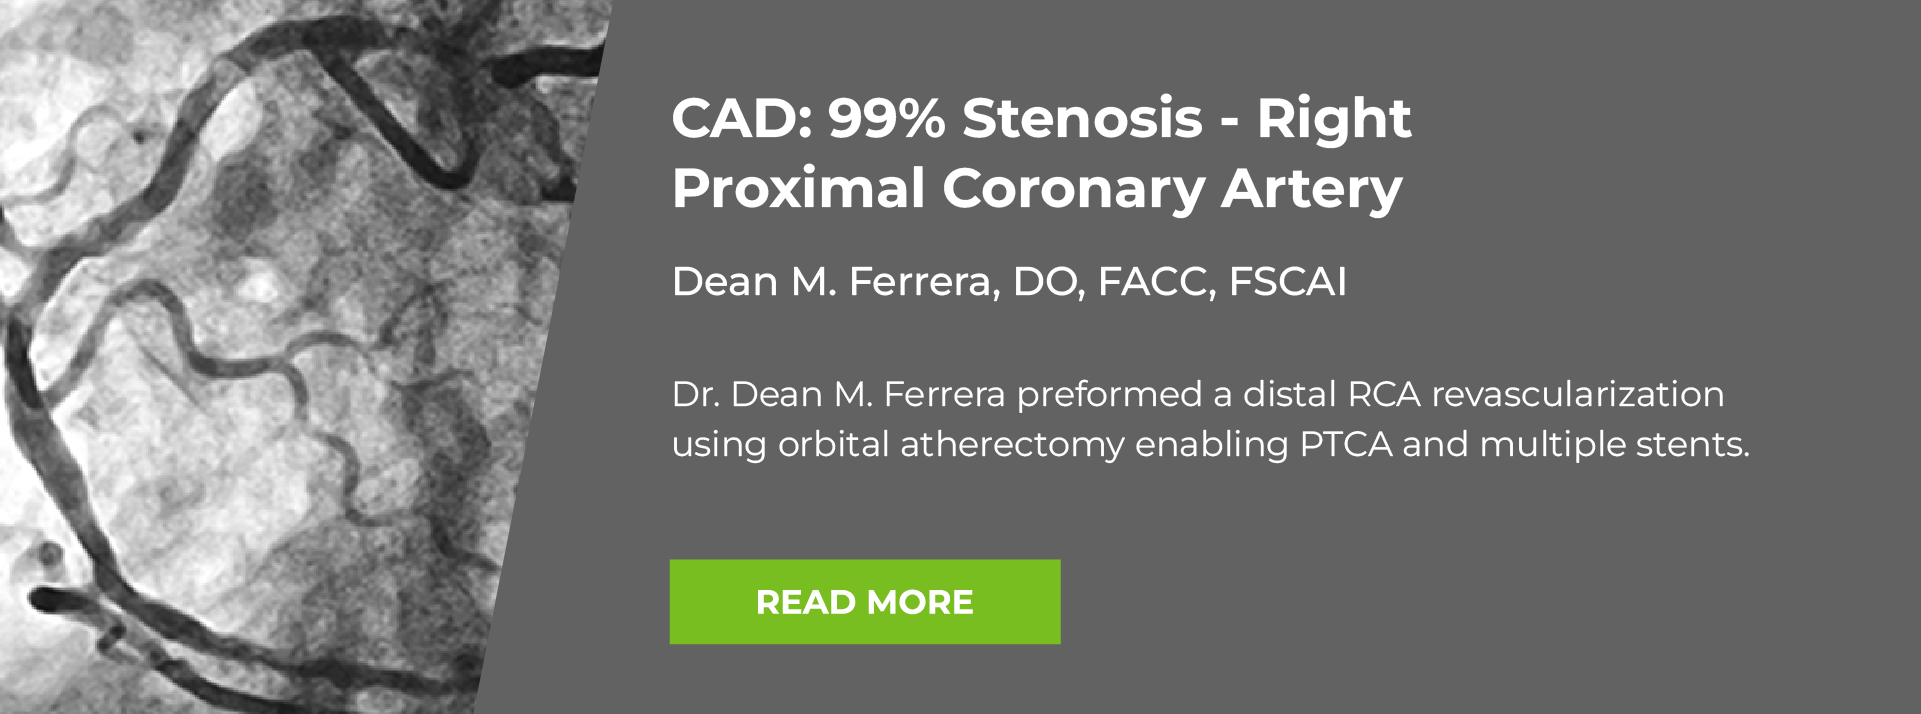 Corronay Artery disease Case Study slide 4 about stenonsis in the right proximal coronary artery